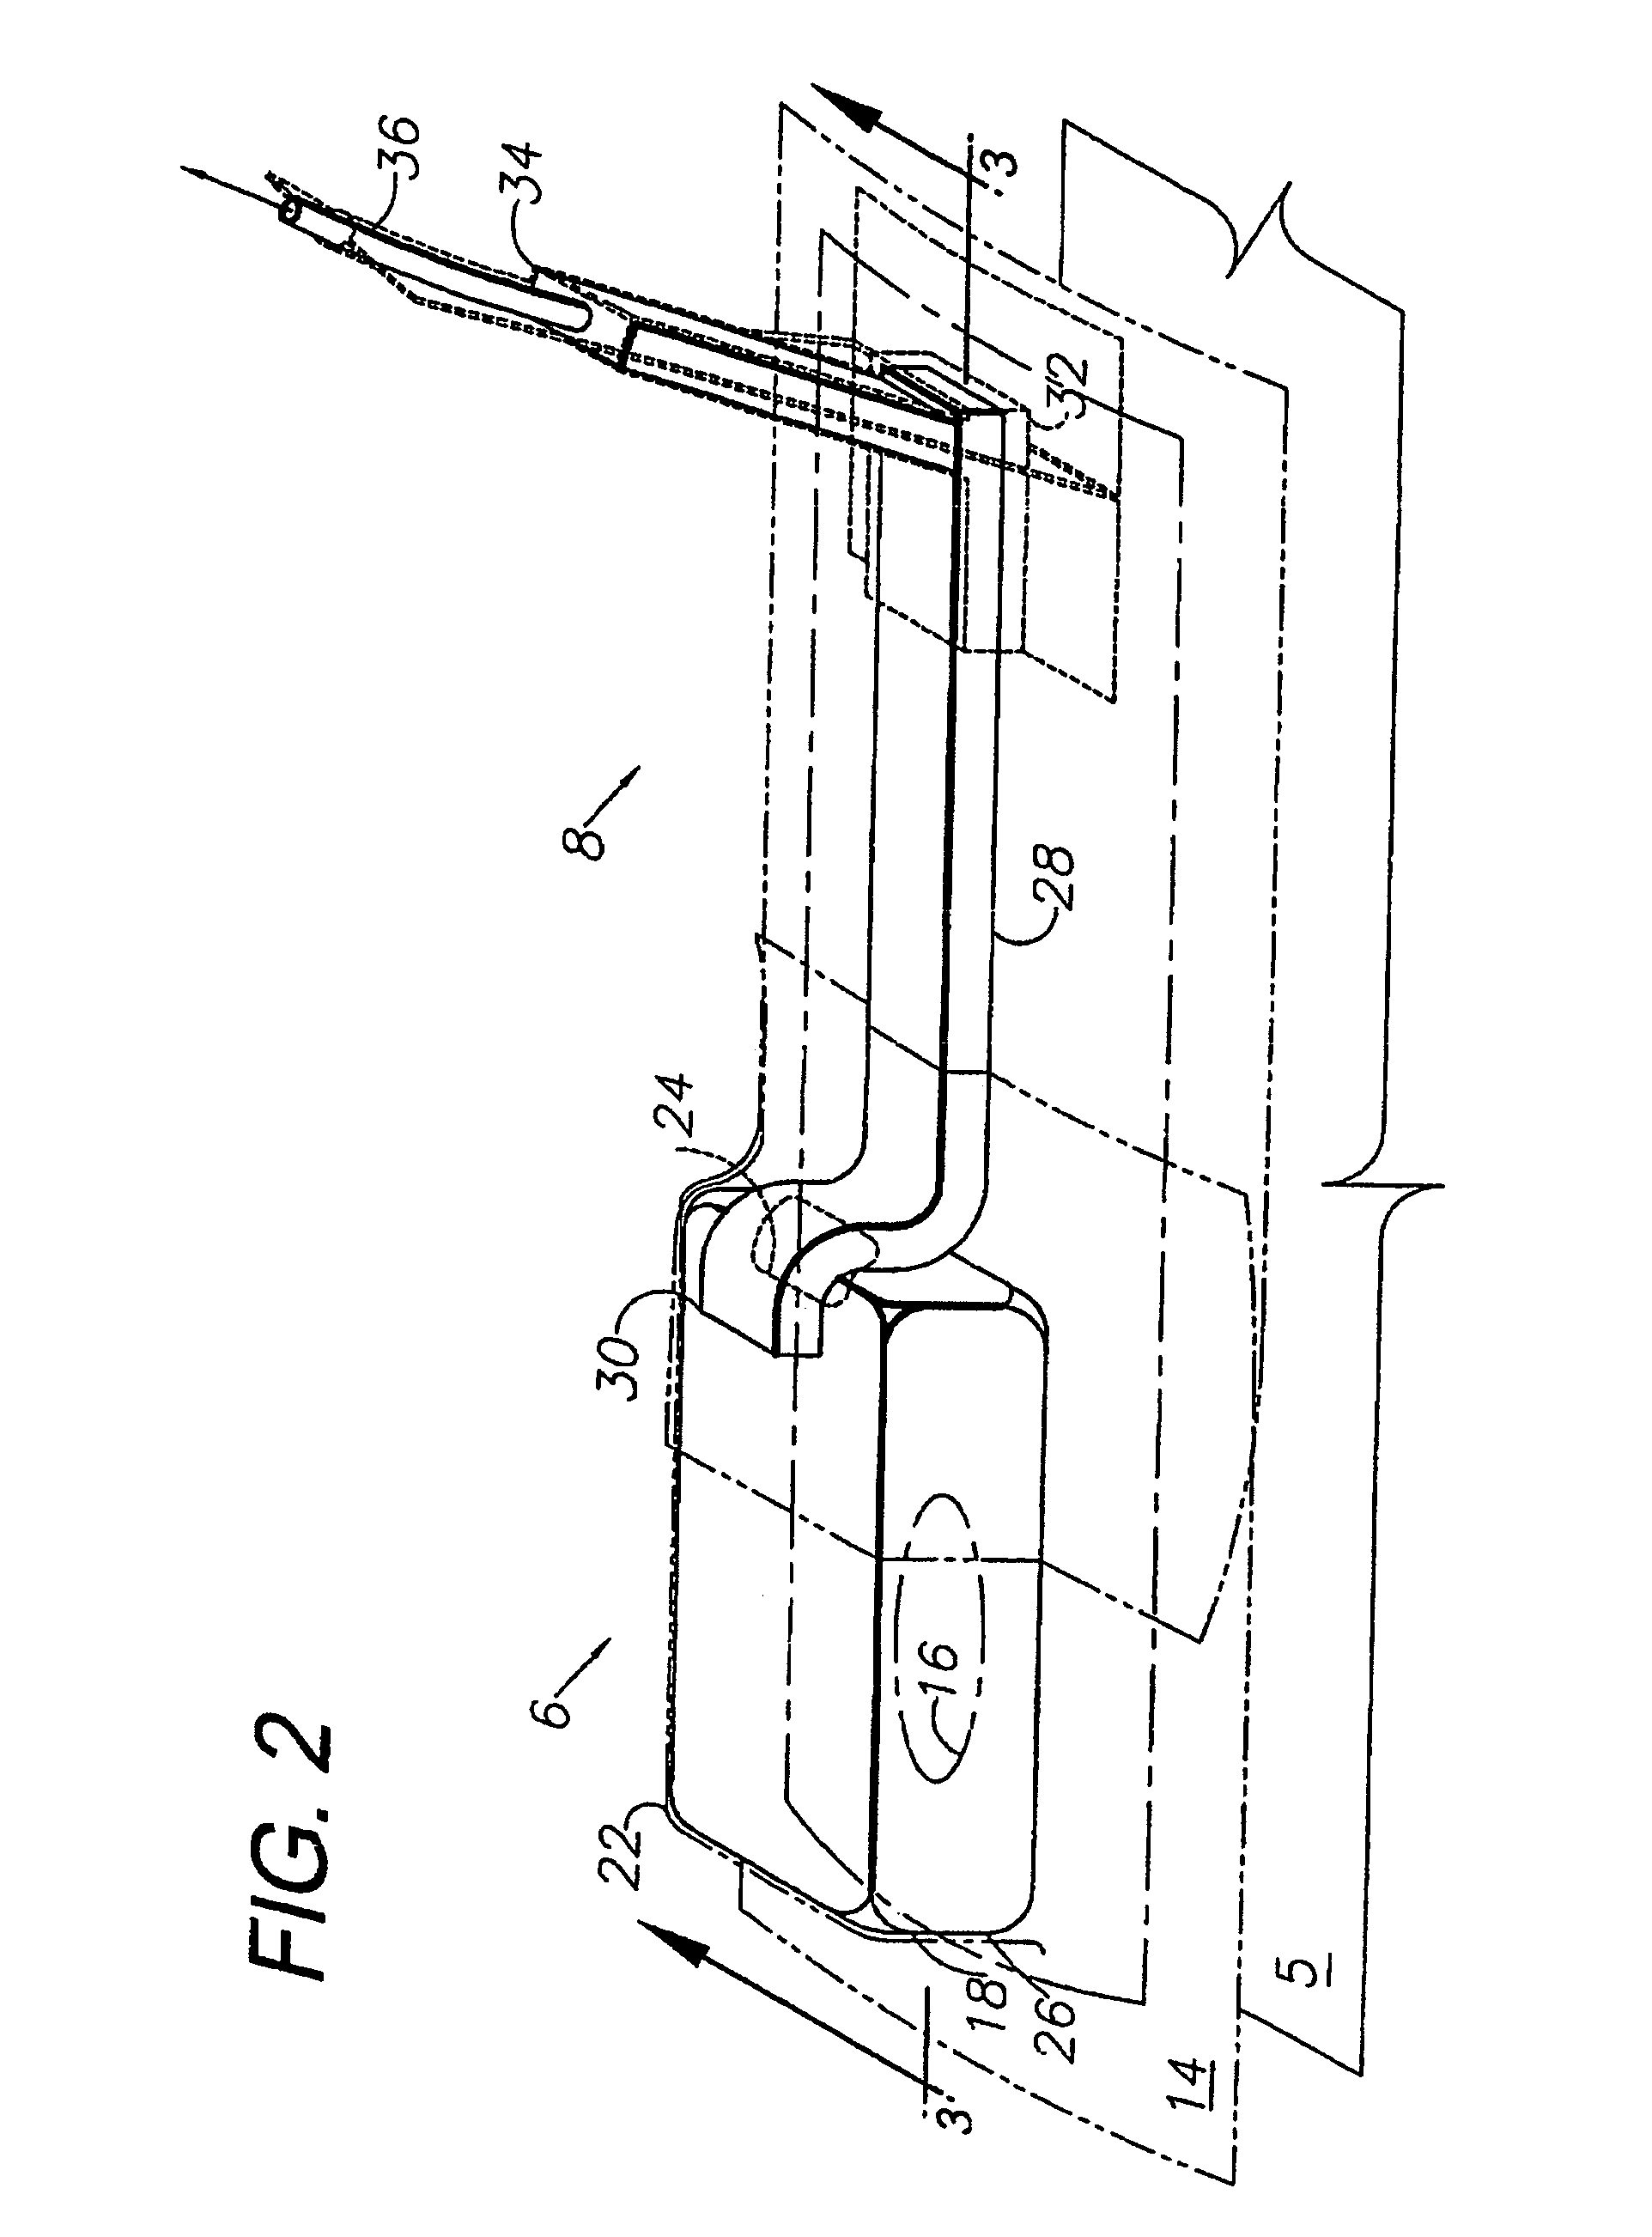 Wound therapy and tissue management system and method with fluid differentiation